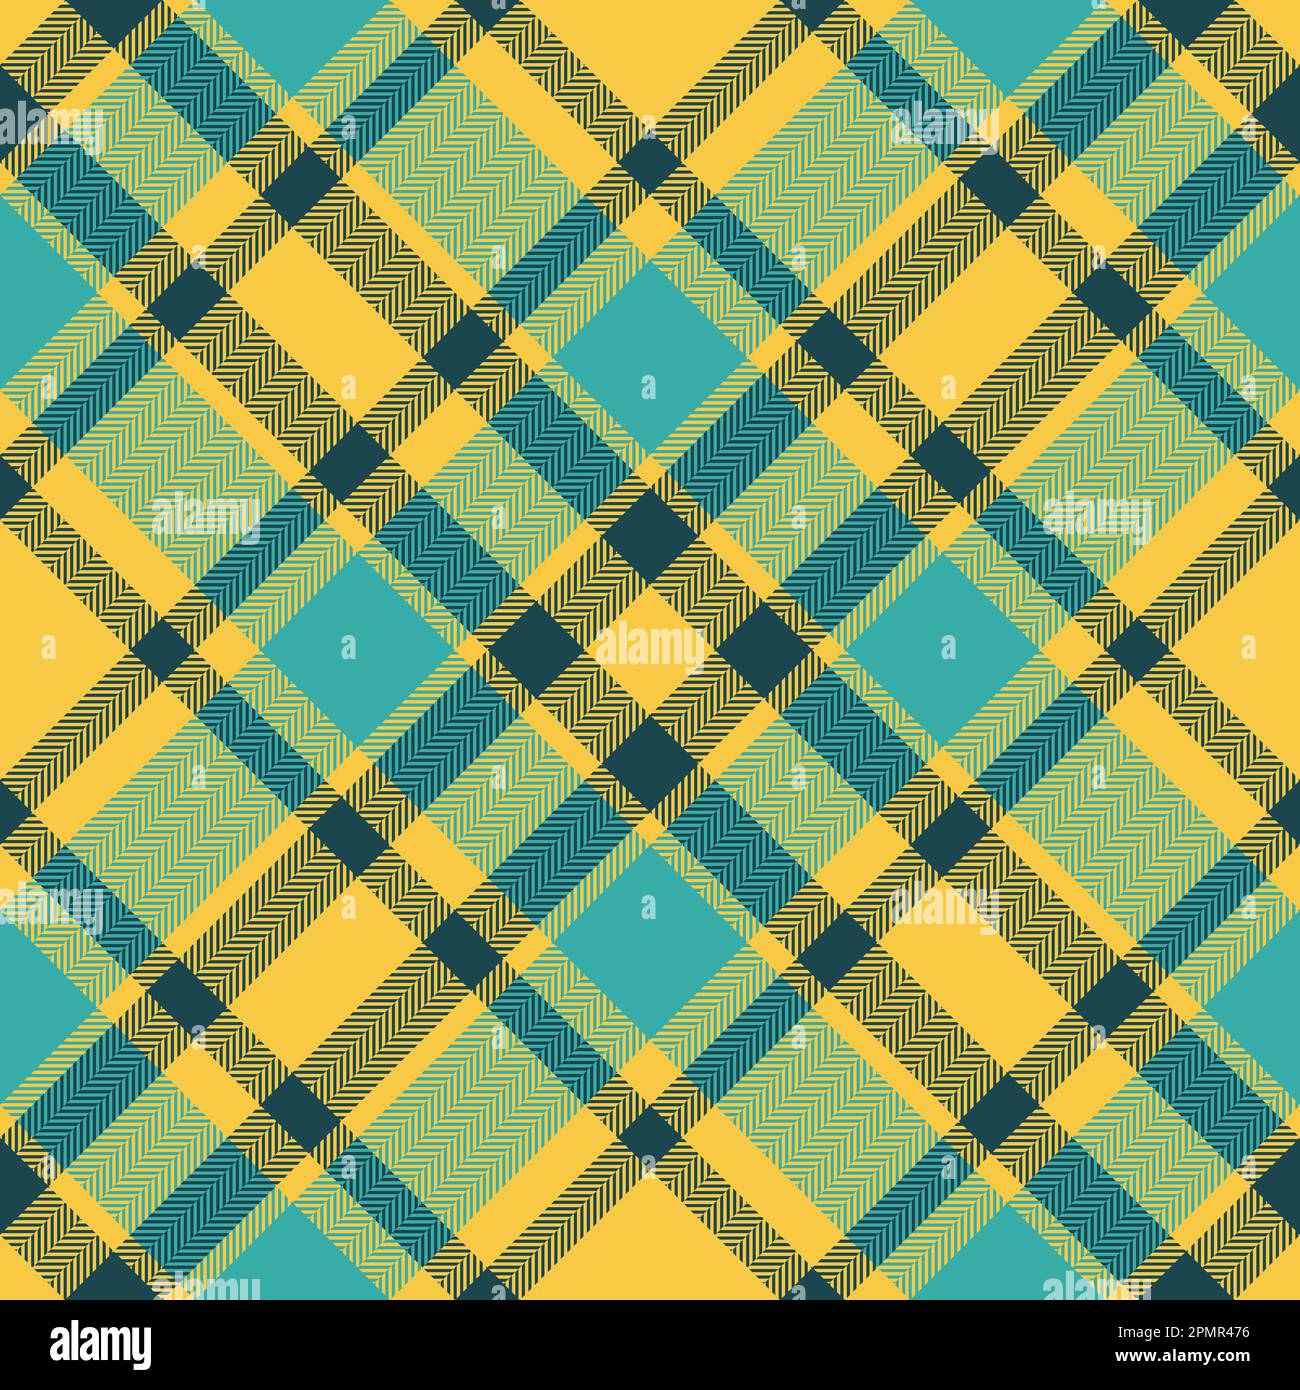 Plaid pattern vector. Check fabric texture. Seamless textile design for ...